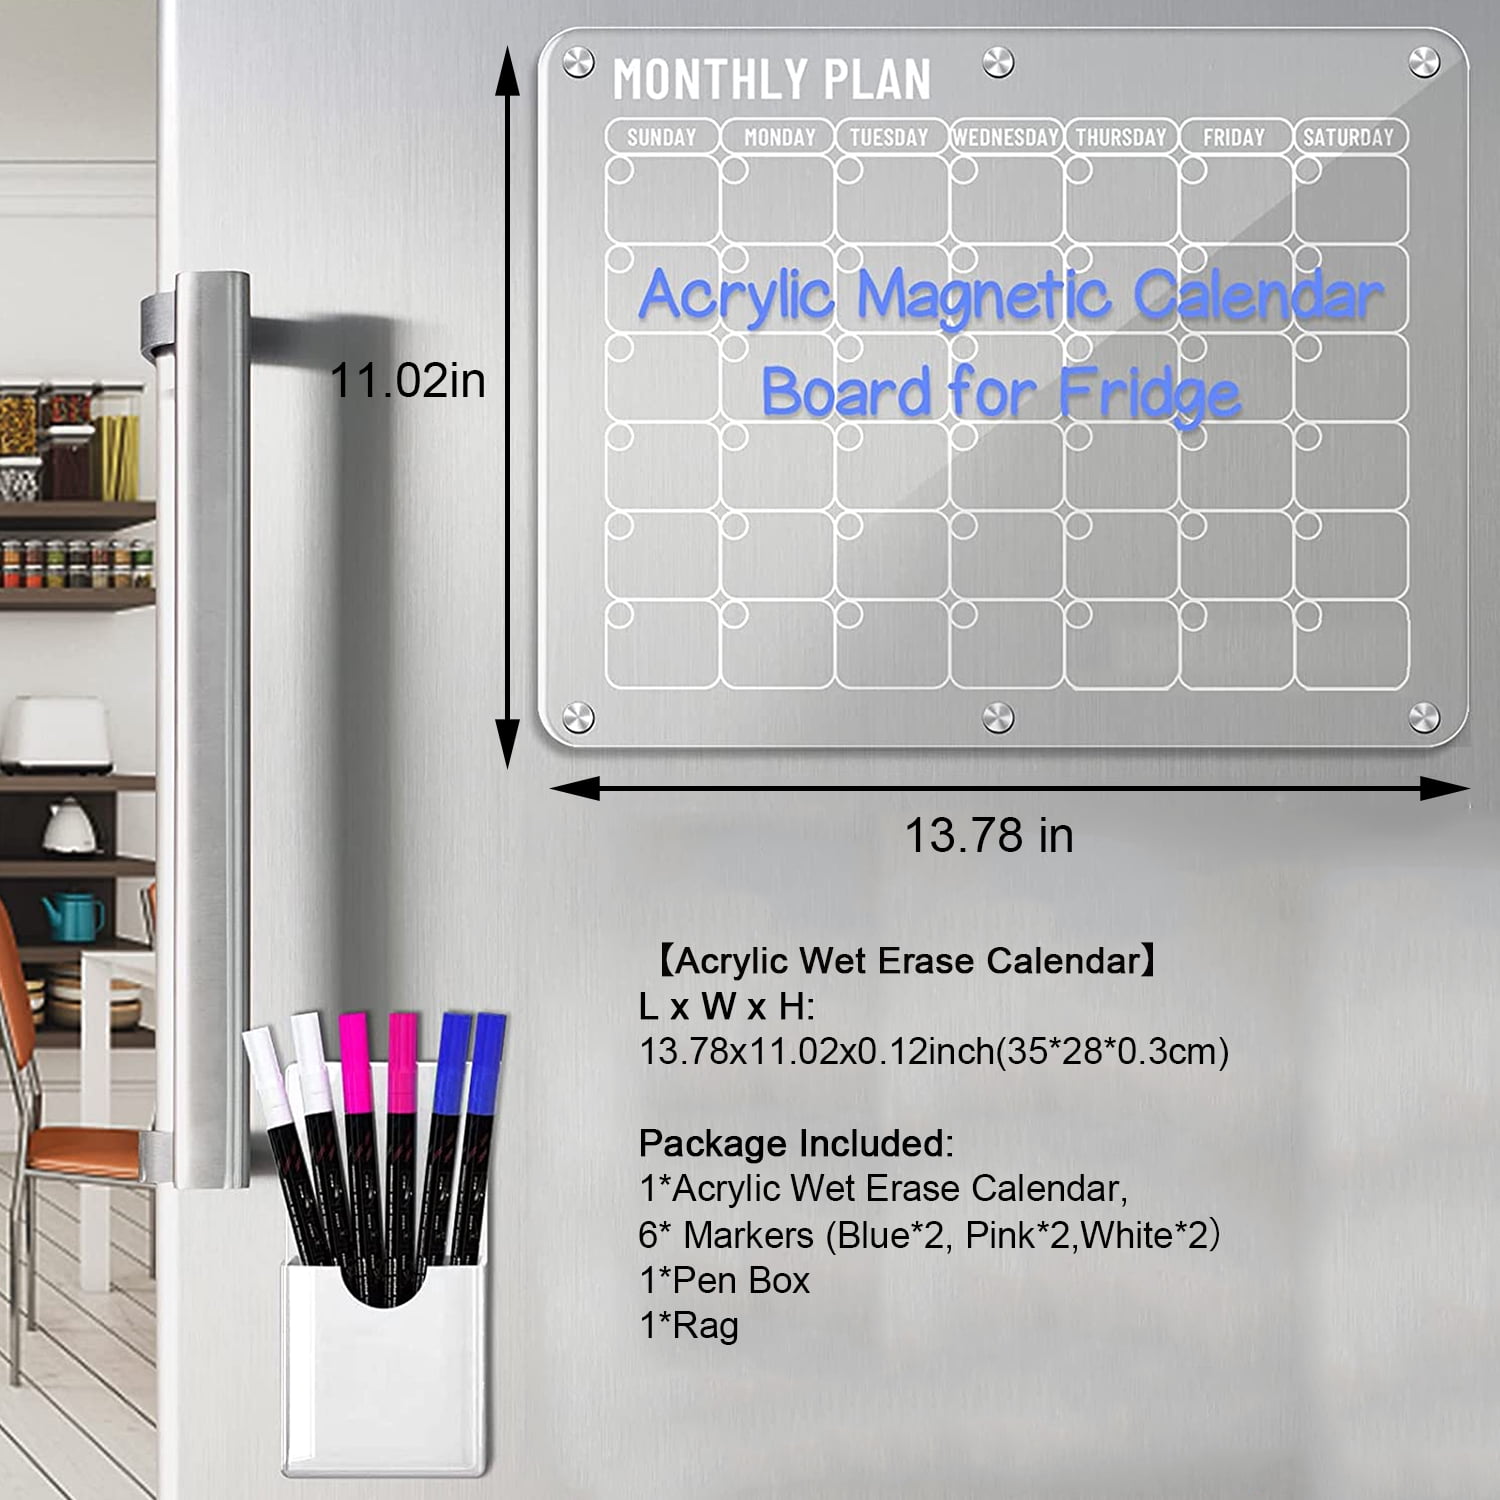 Acrylic Magnetic Fridge Calendar & Weekly Planner Monthly Dry Erase Board  for Refrigerator w/ 8 Markers & Magnetic Pen Holder Meal Planning  Whiteboard